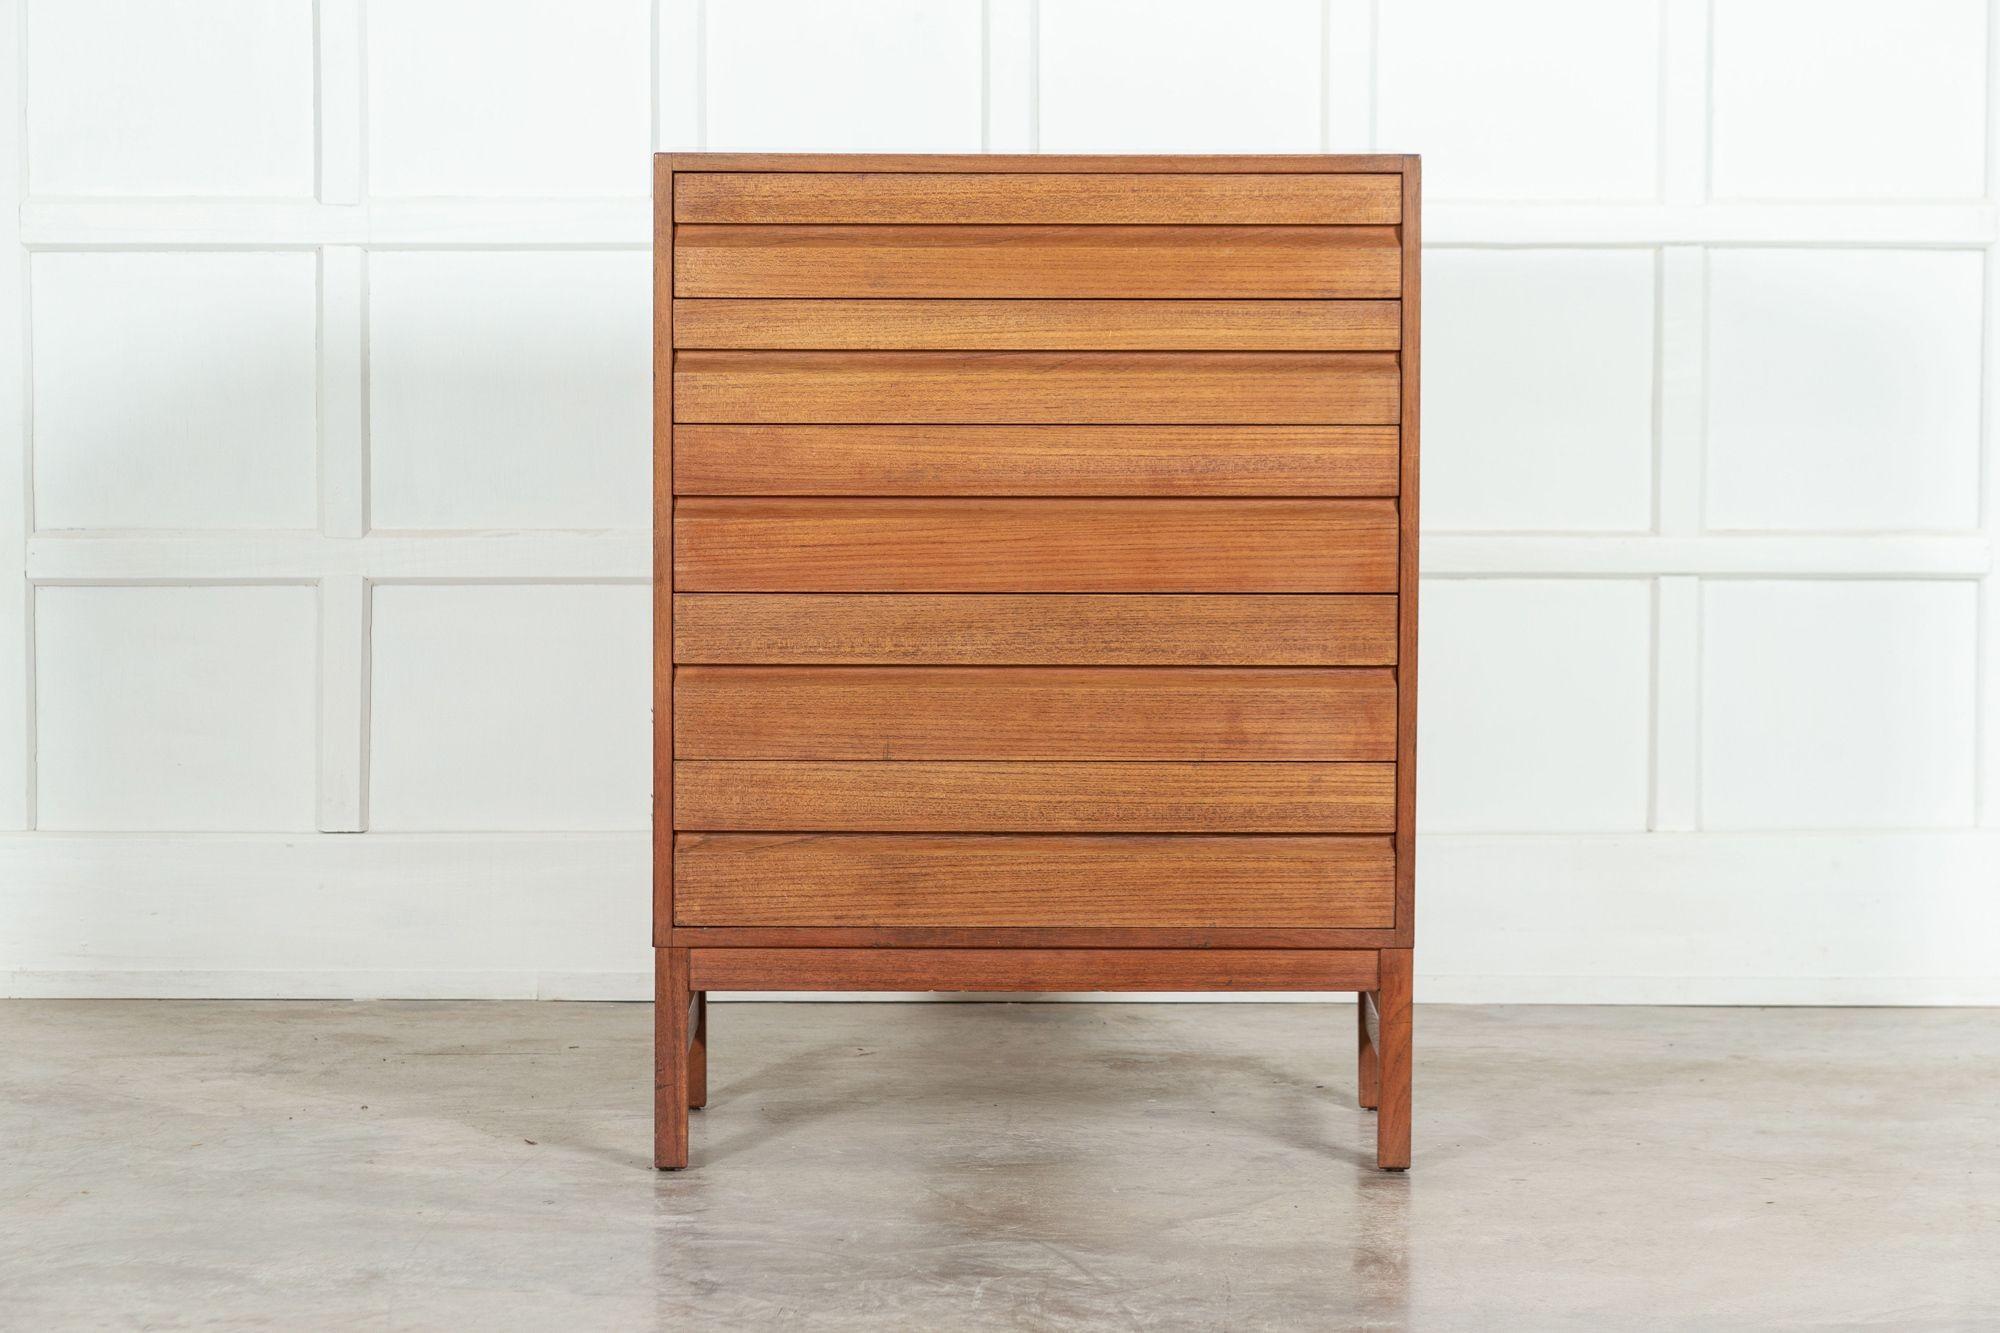 Swedish Midcentury Teak Chest Drawers In Good Condition For Sale In Staffordshire, GB